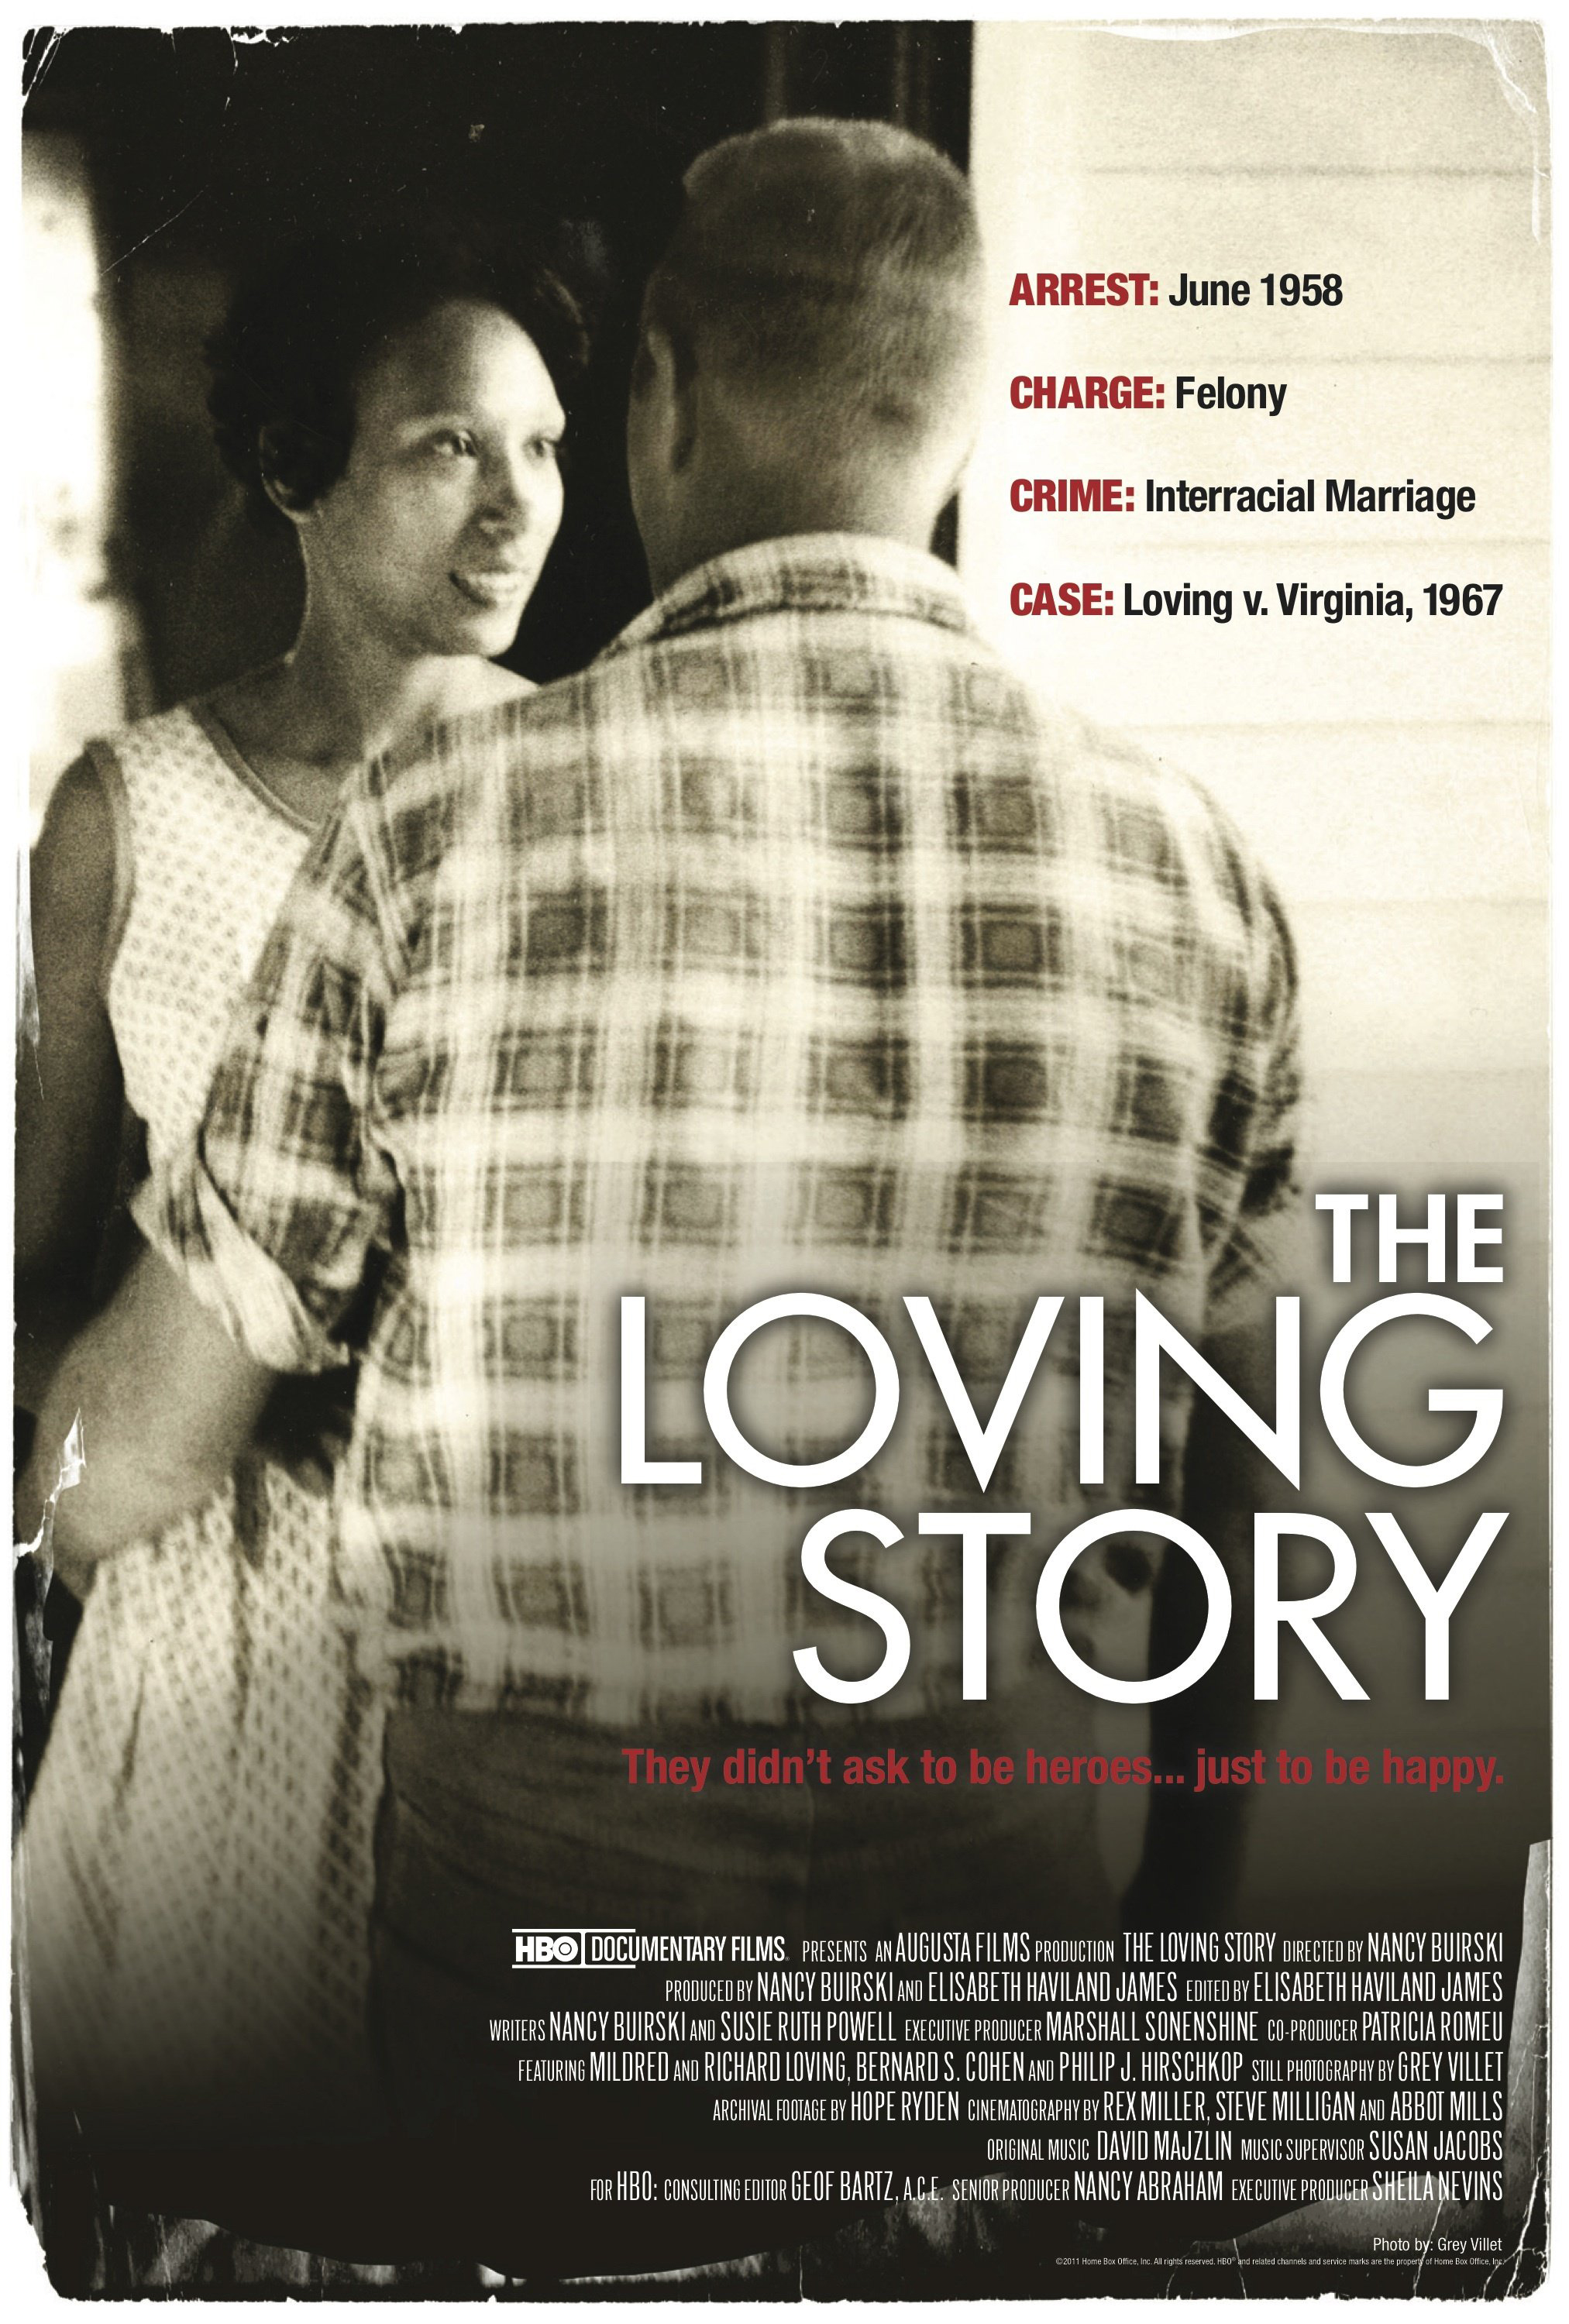 Poster for documentary Loving Story, White man and Black woman embracing on porch